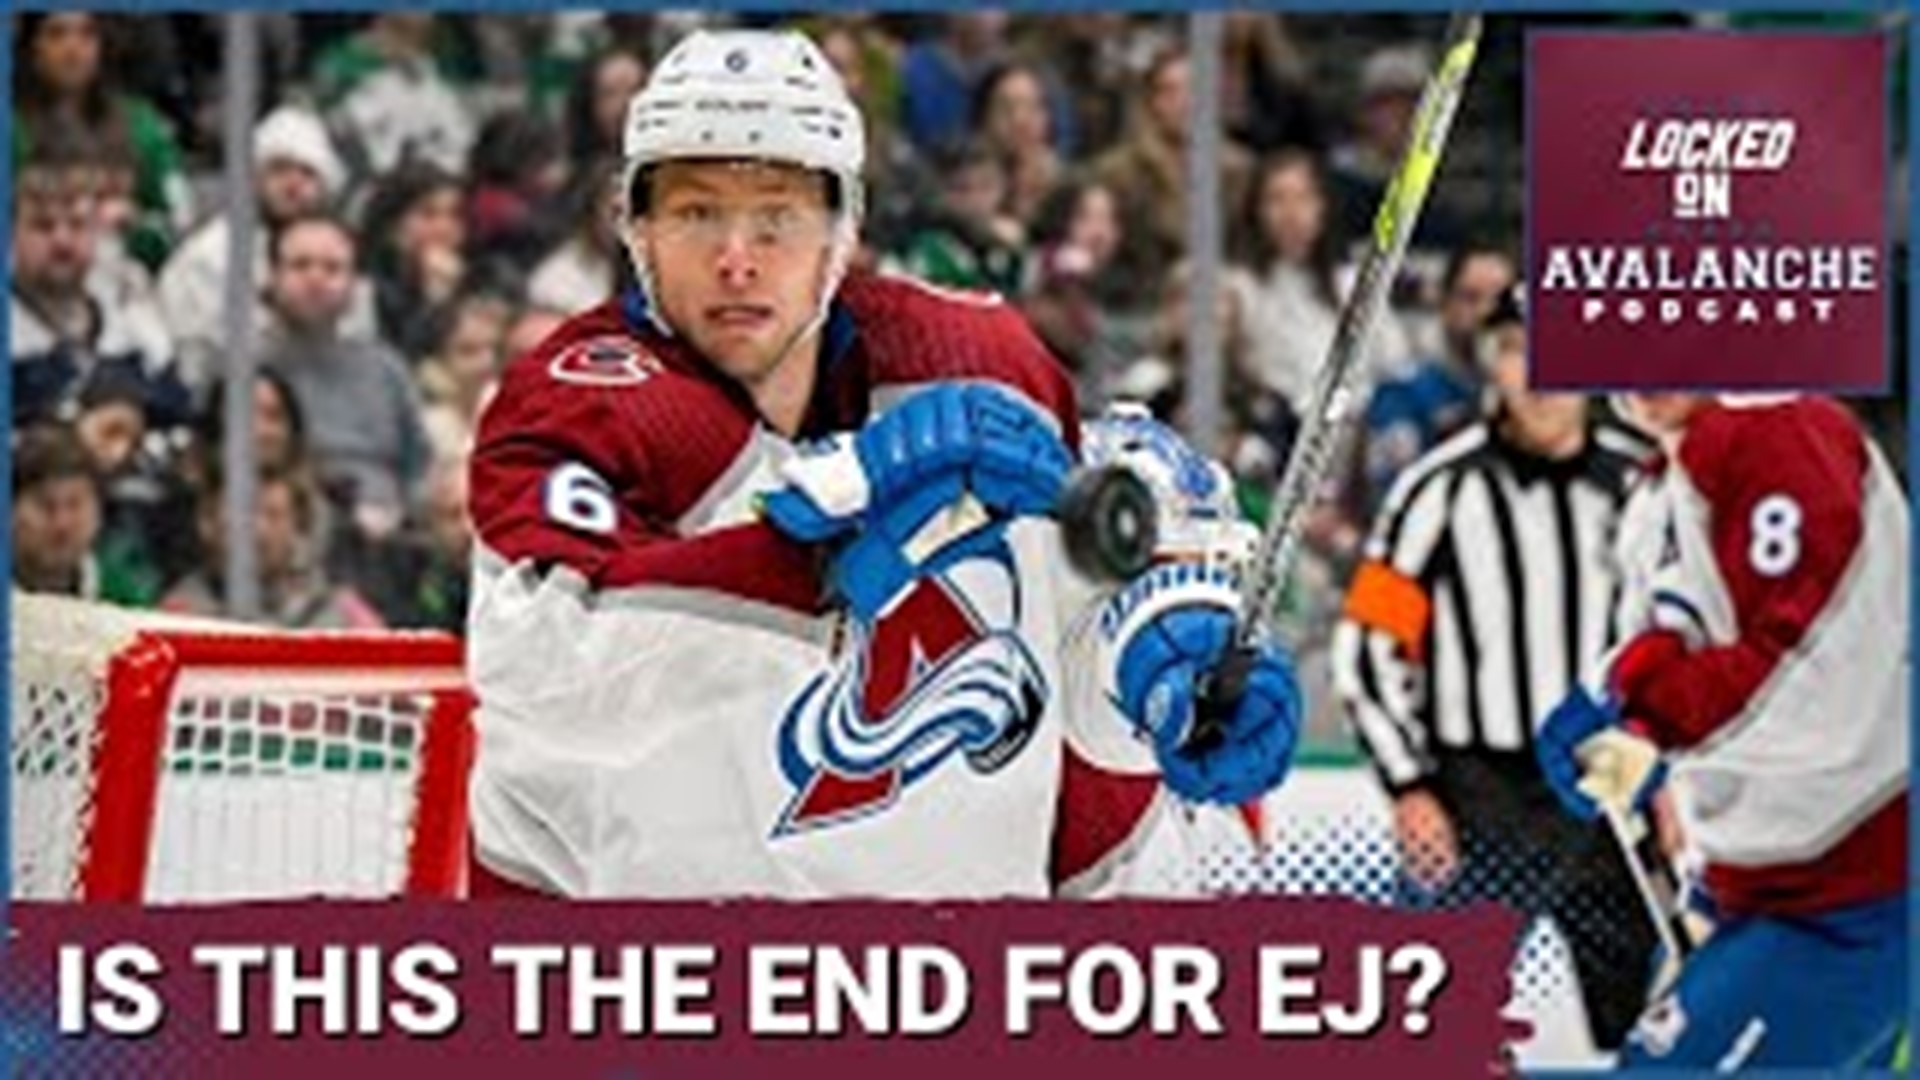 The Avs have a hefty number of UFA's they need to sift through, and they need to ask themselves which ones do they want to bring back and which ones they don't.